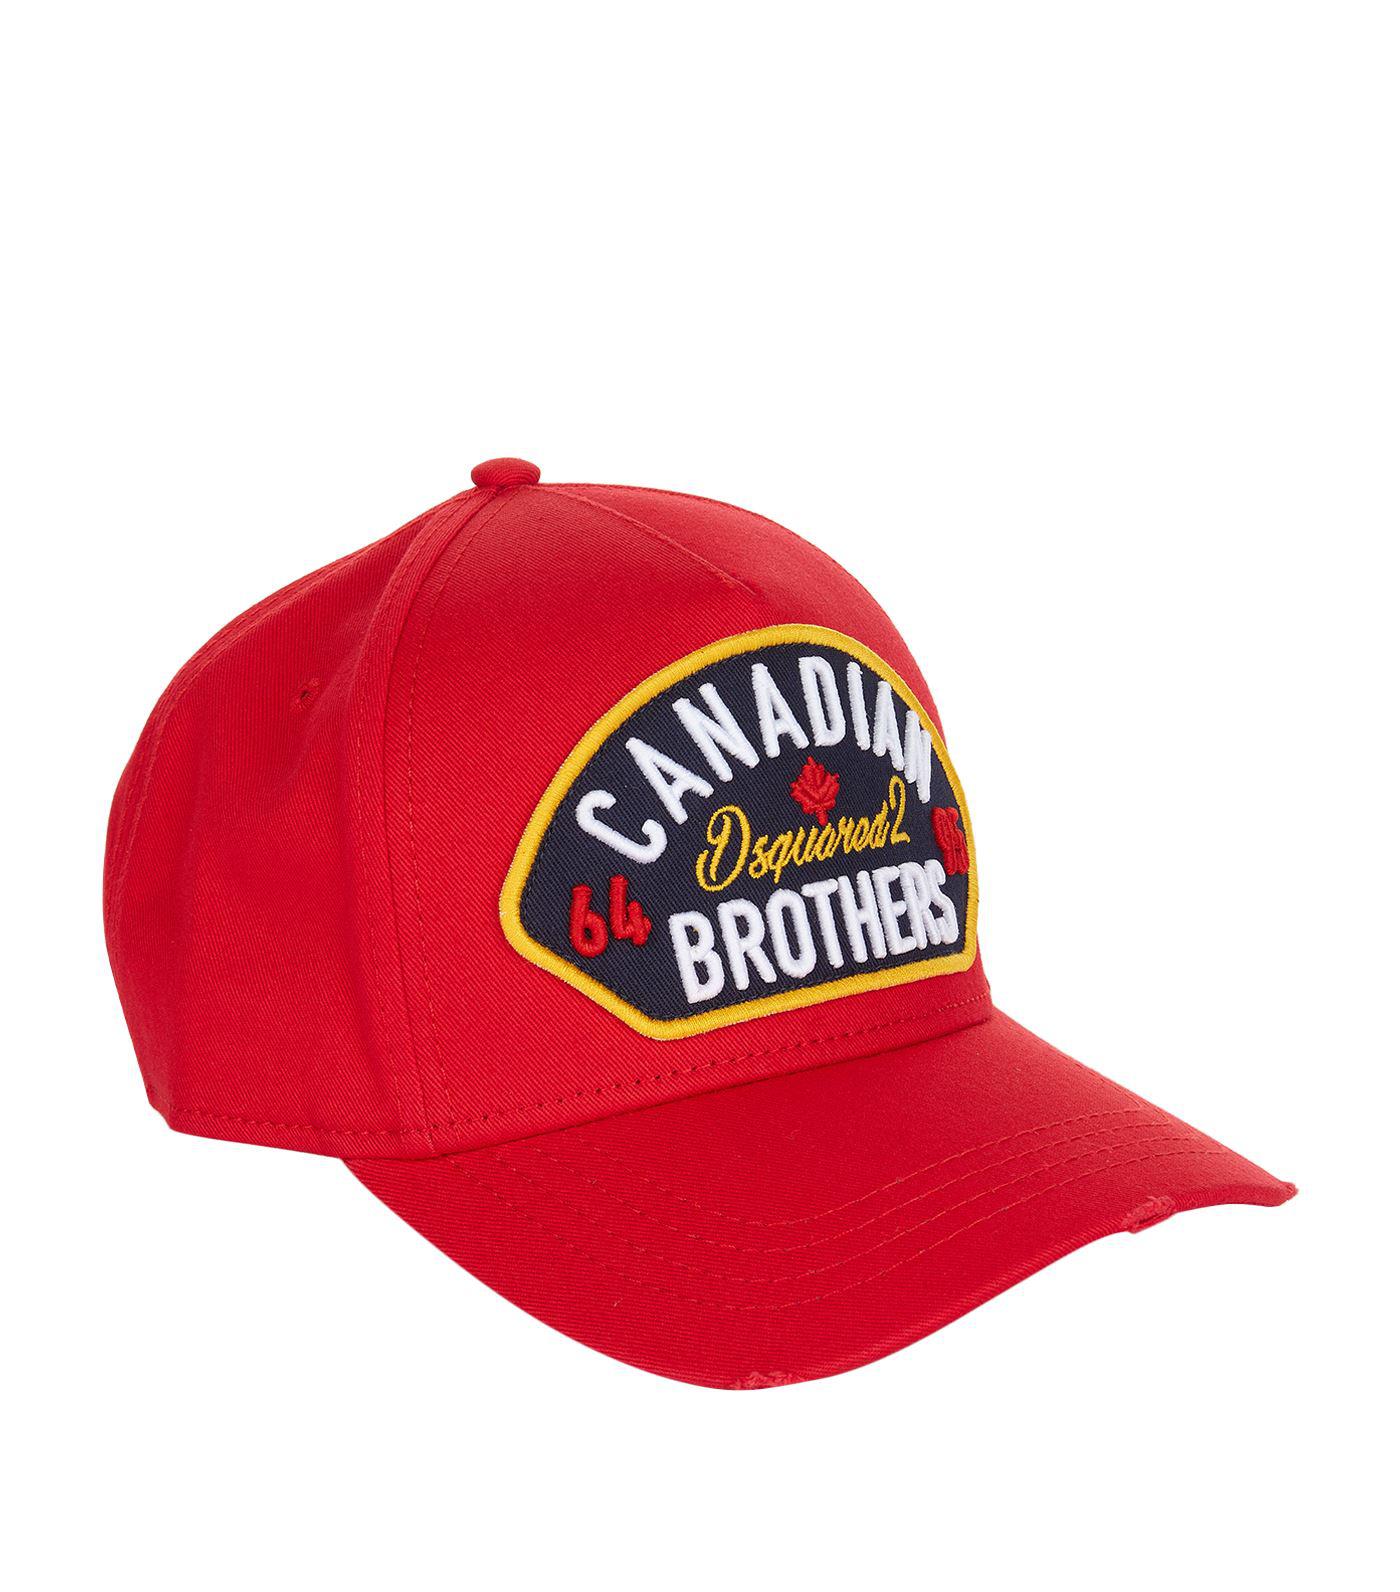 dsquared2 canadian brothers cap